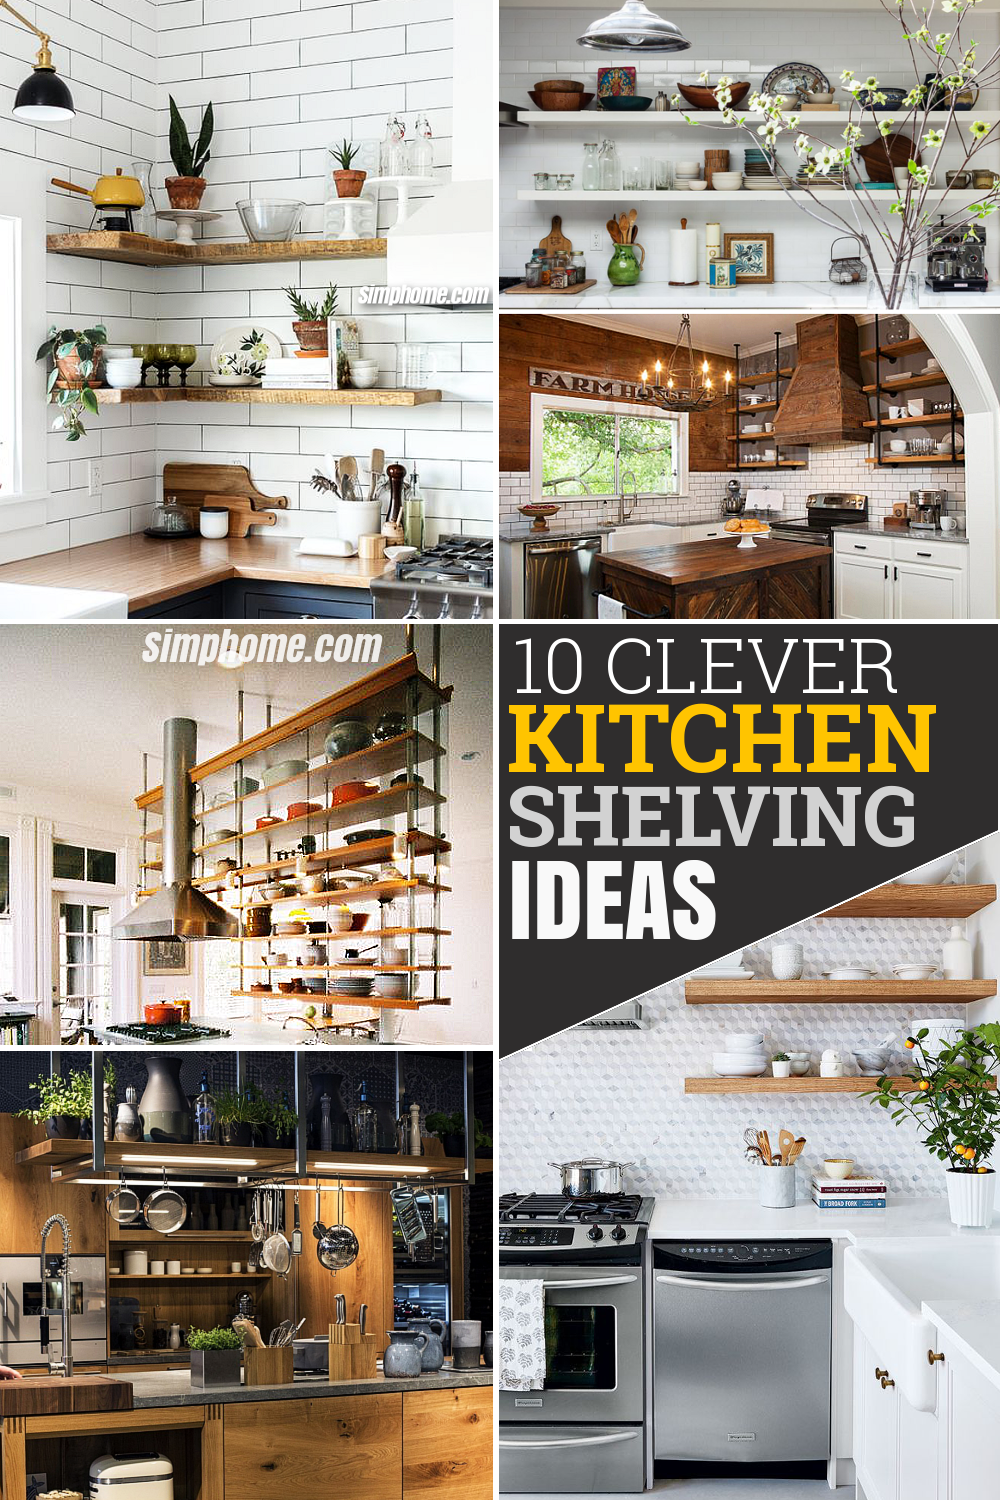 10 Clever Kitchen Shelving Ideas for Living the Kitchen Up via Simphome com Pinterest featured Image